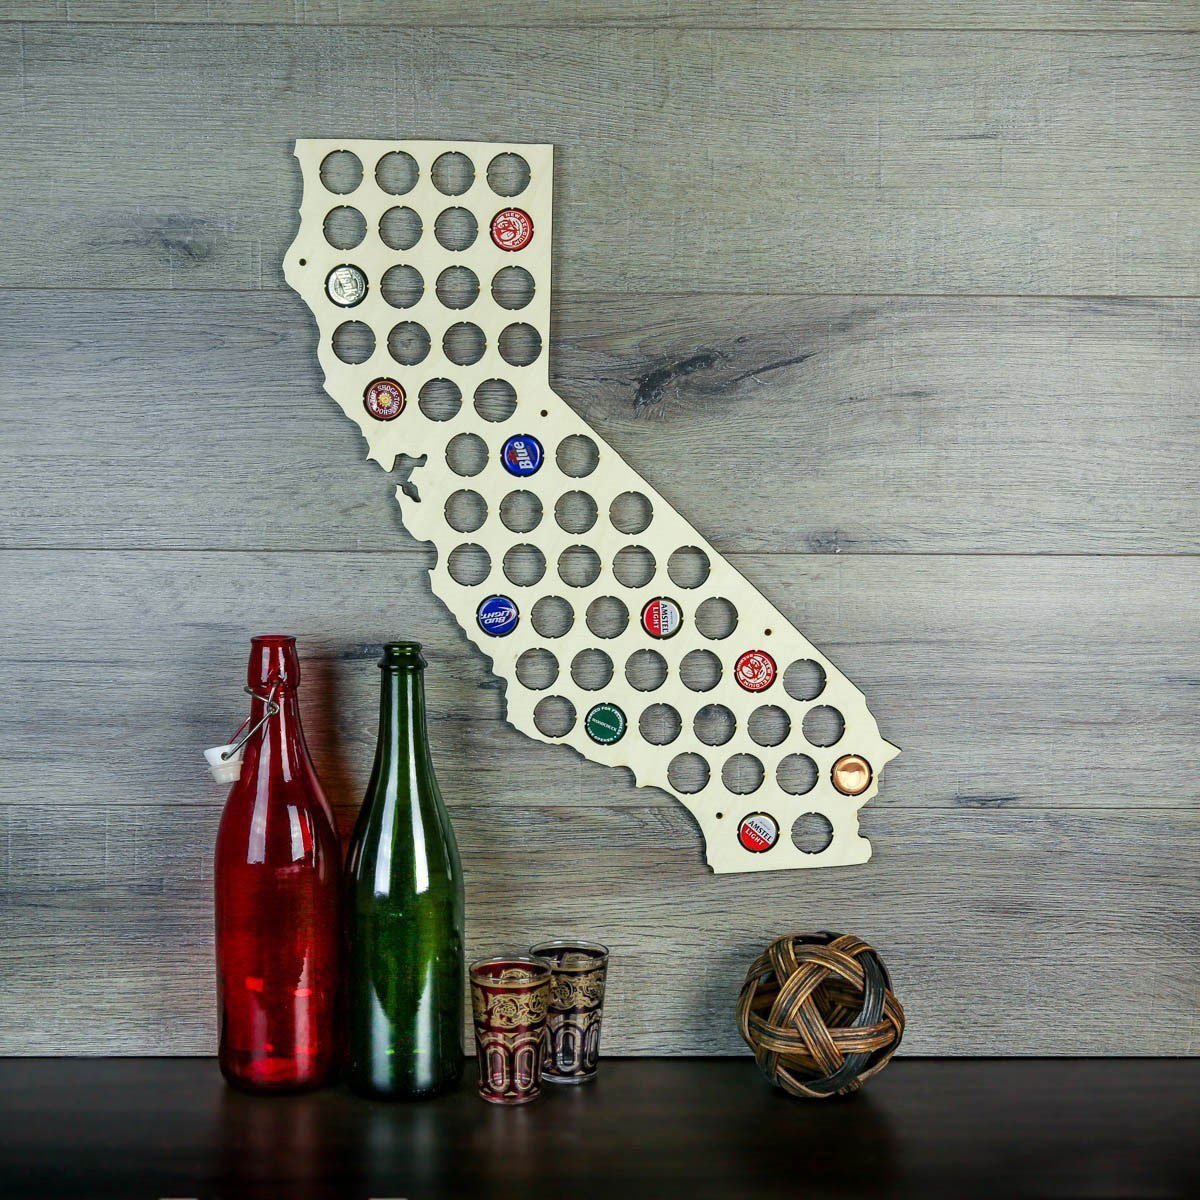 Torched Products Beer Bottle Cap Holder California Beer Cap Map (777520021621)